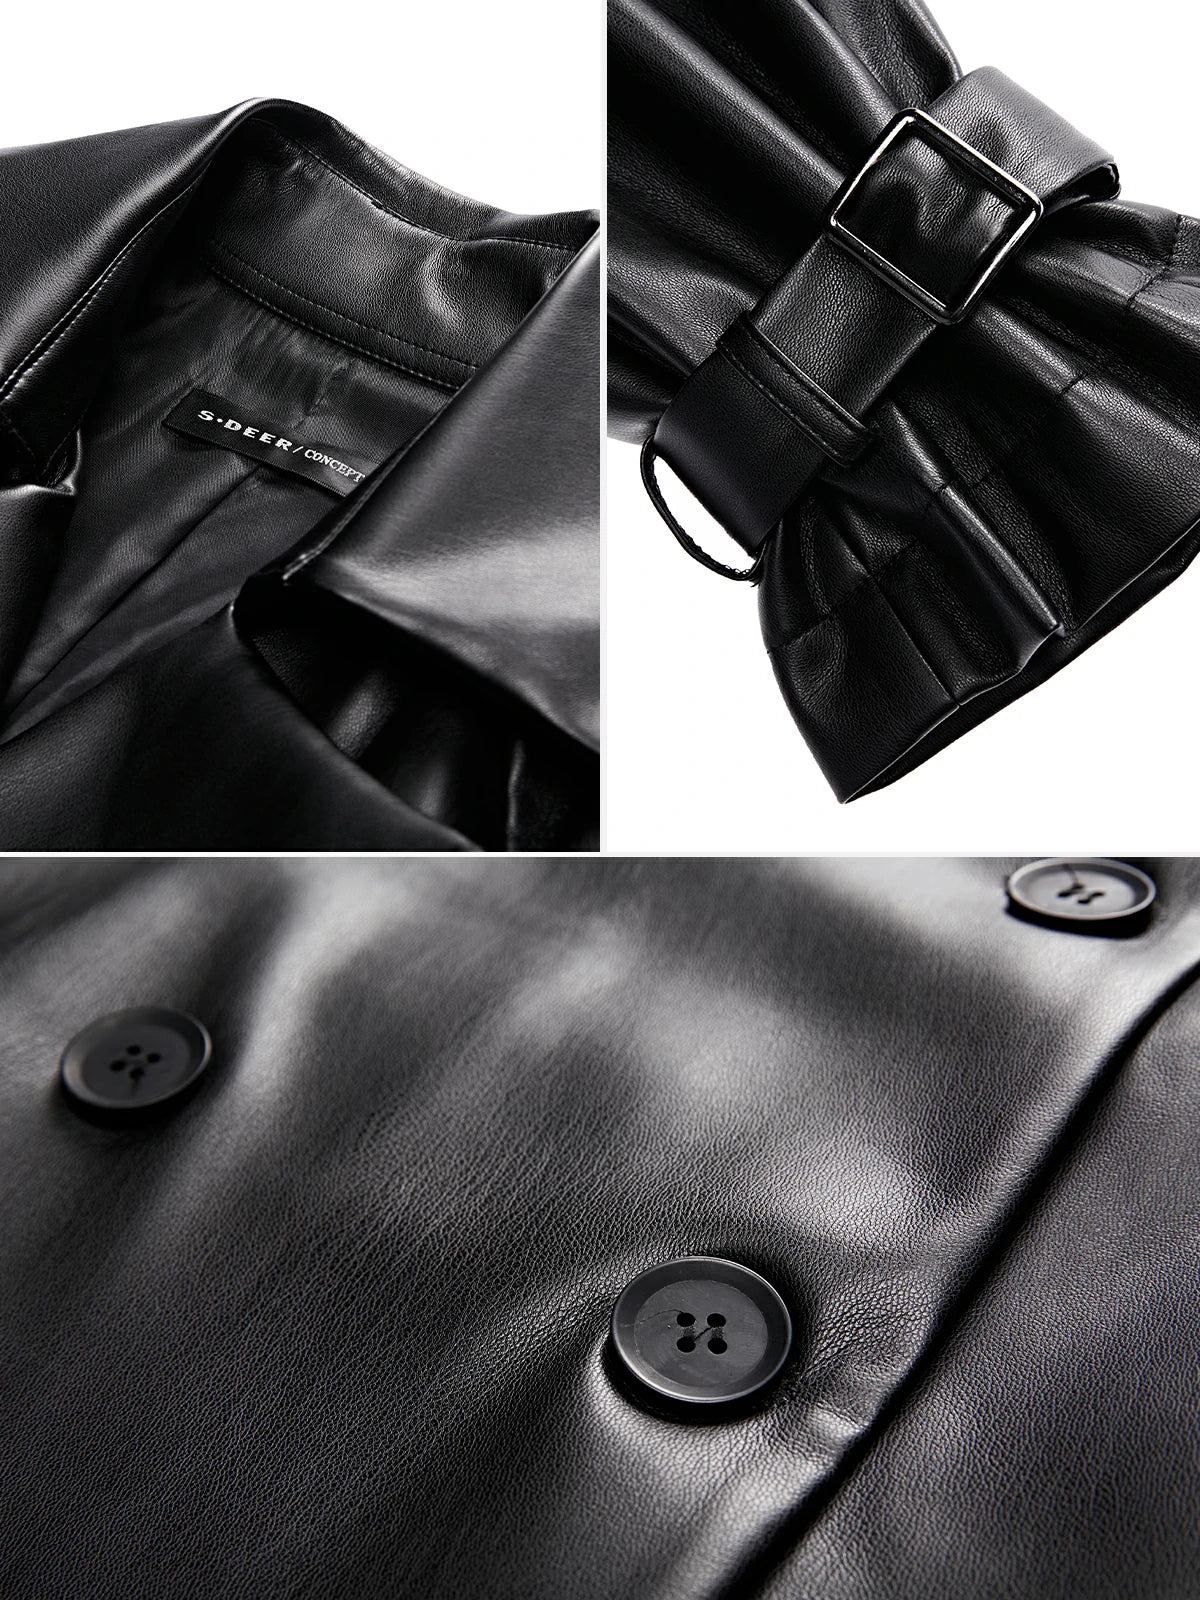 Dual Delight of Fashion and Comfort: Experience the dual delight of fashion and comfort with this long leather coat.